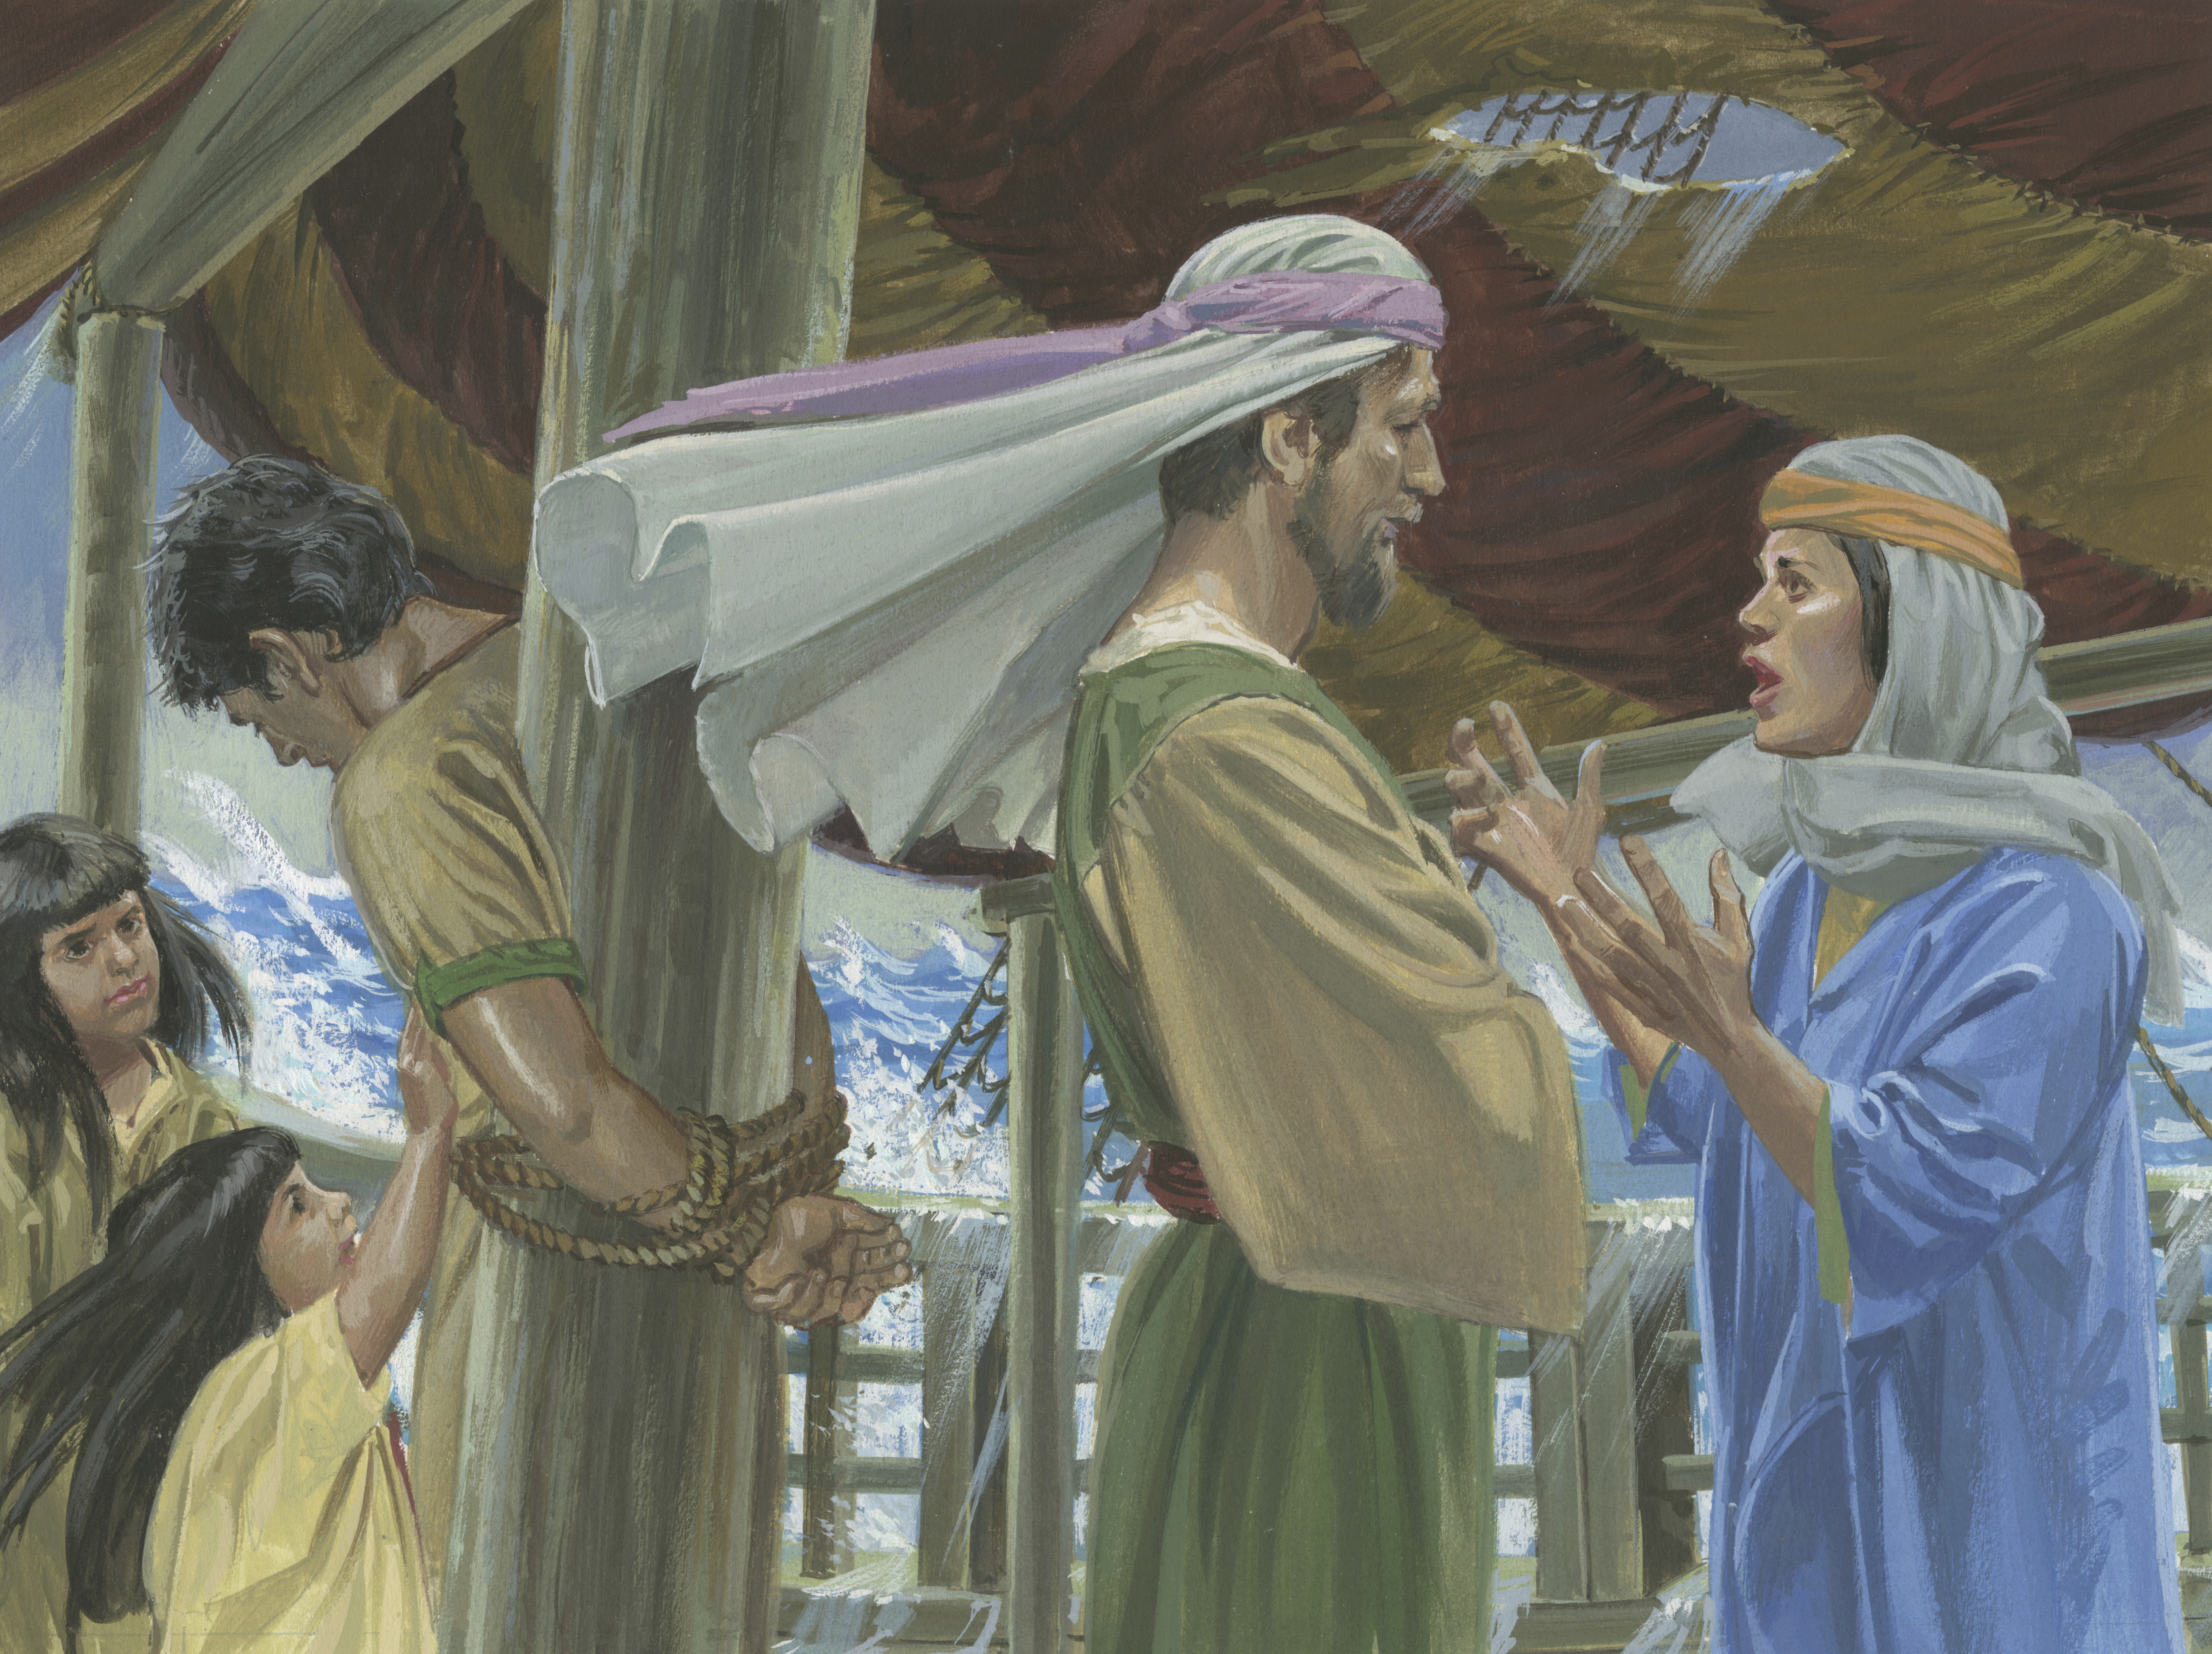 A painting by Jerry Thompson depicting Nephi tied up on the ship; Primary manual 4-19